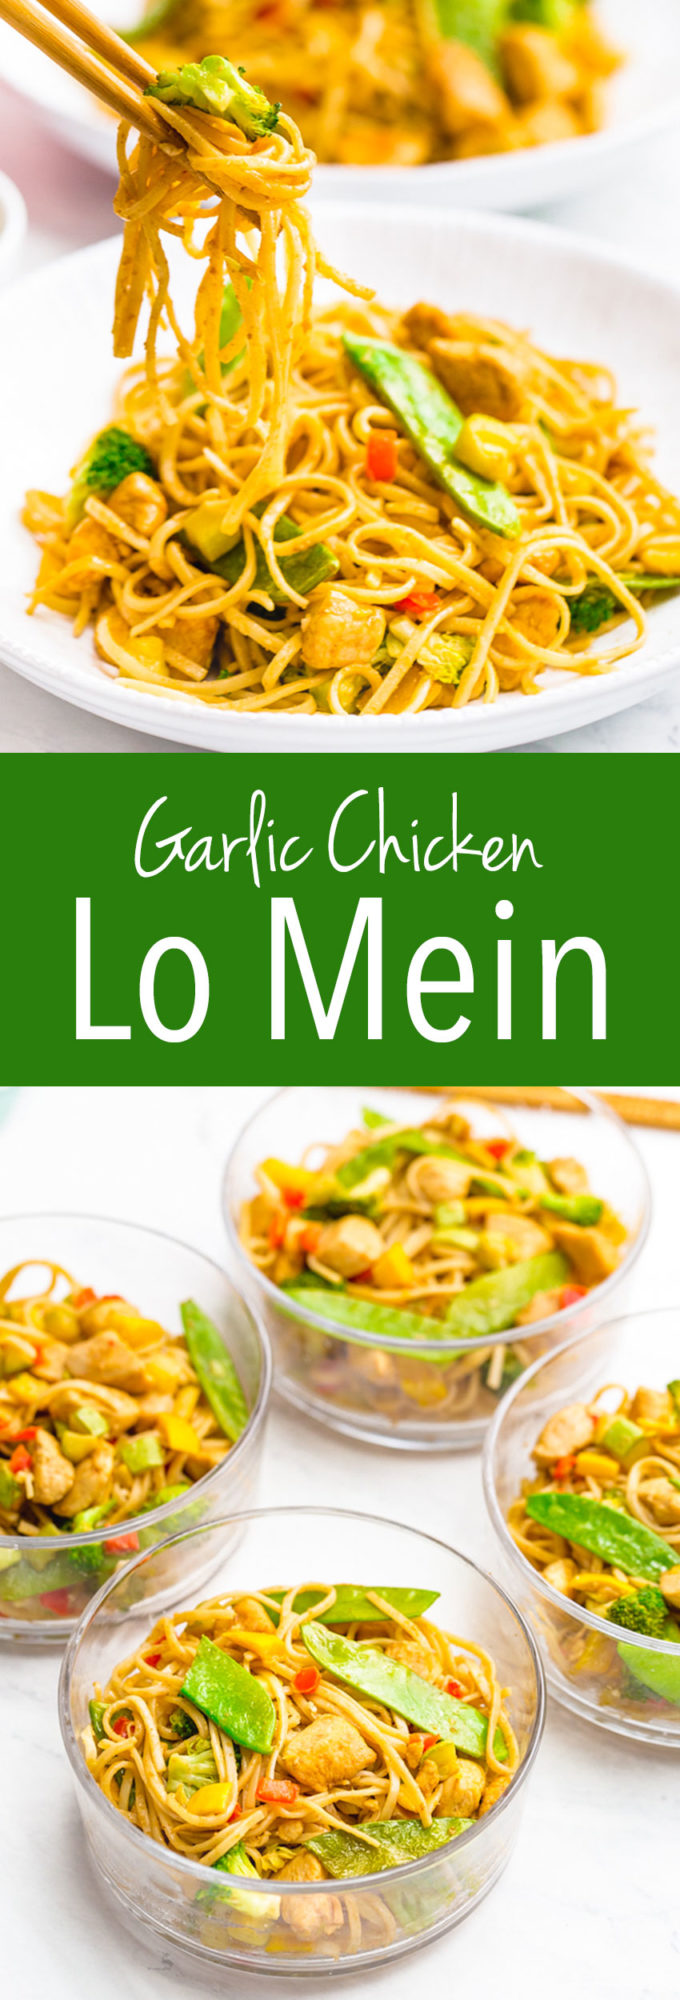 Garlic chicken Low Mein is an easy asian inspired meal